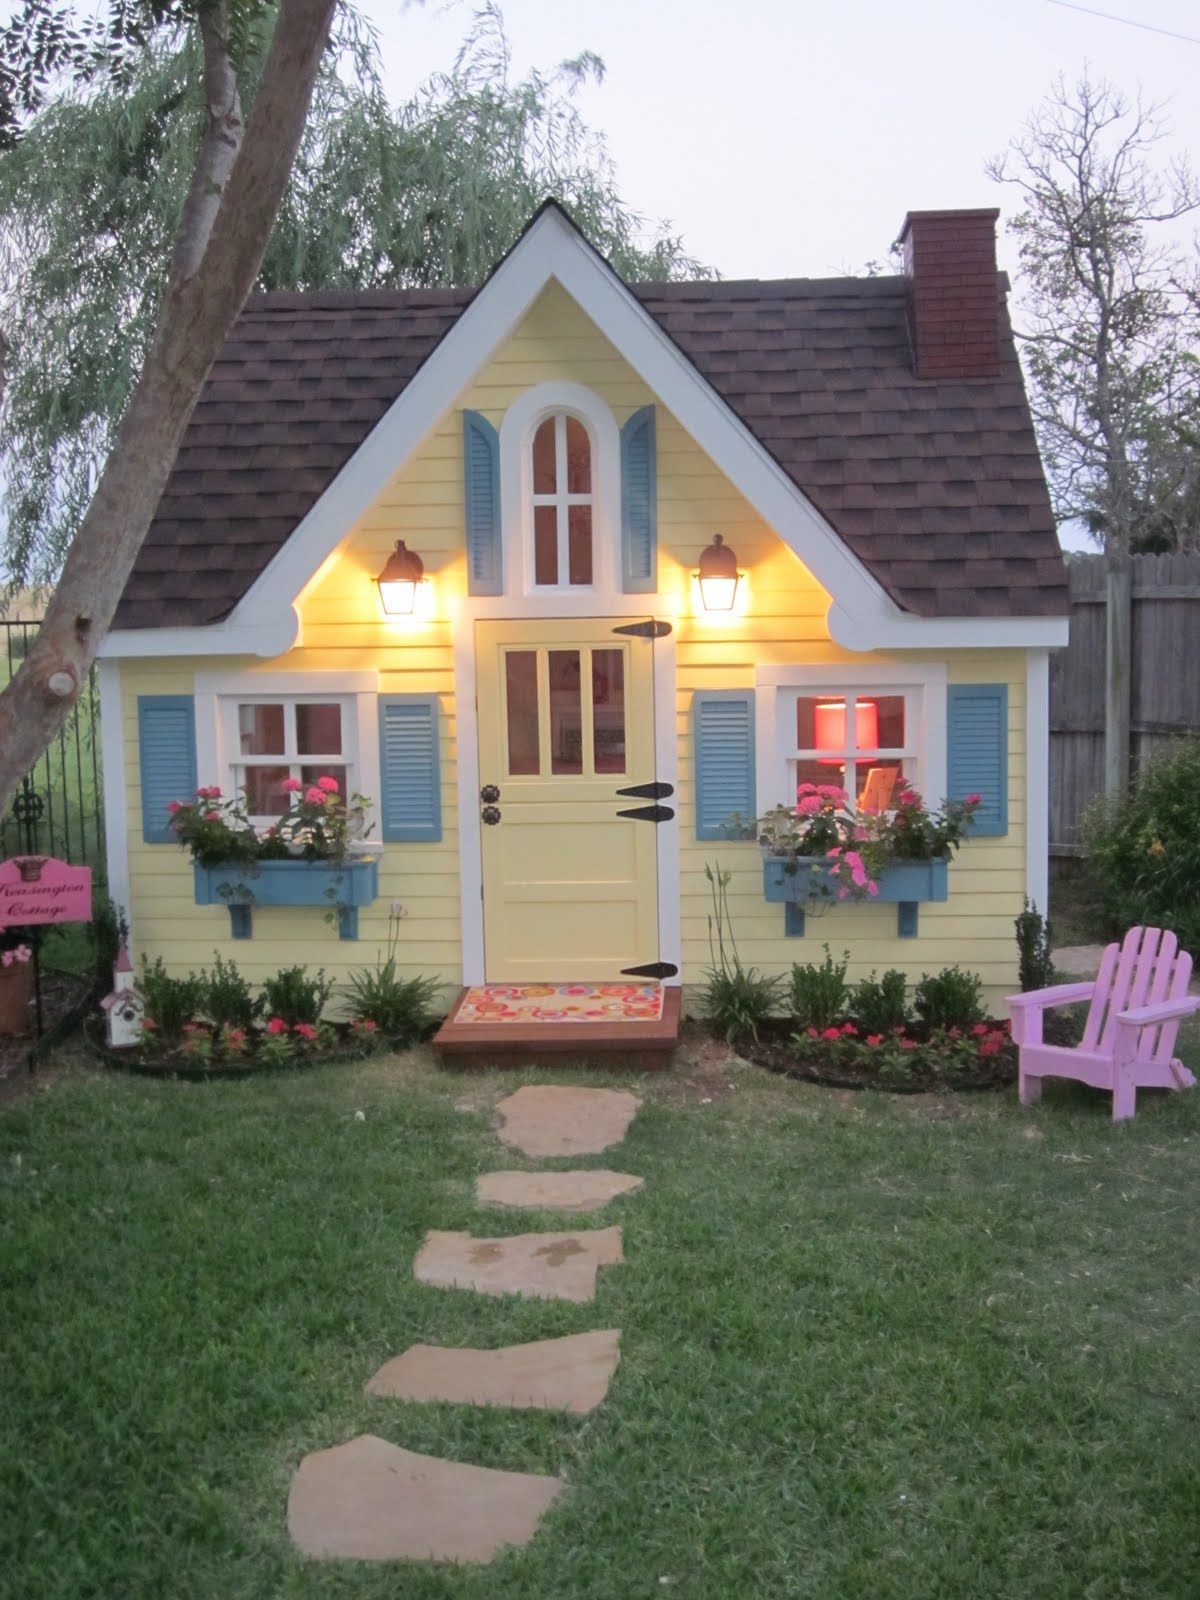 If I had a little girl I would totally want her to have a little “cottage” like this!